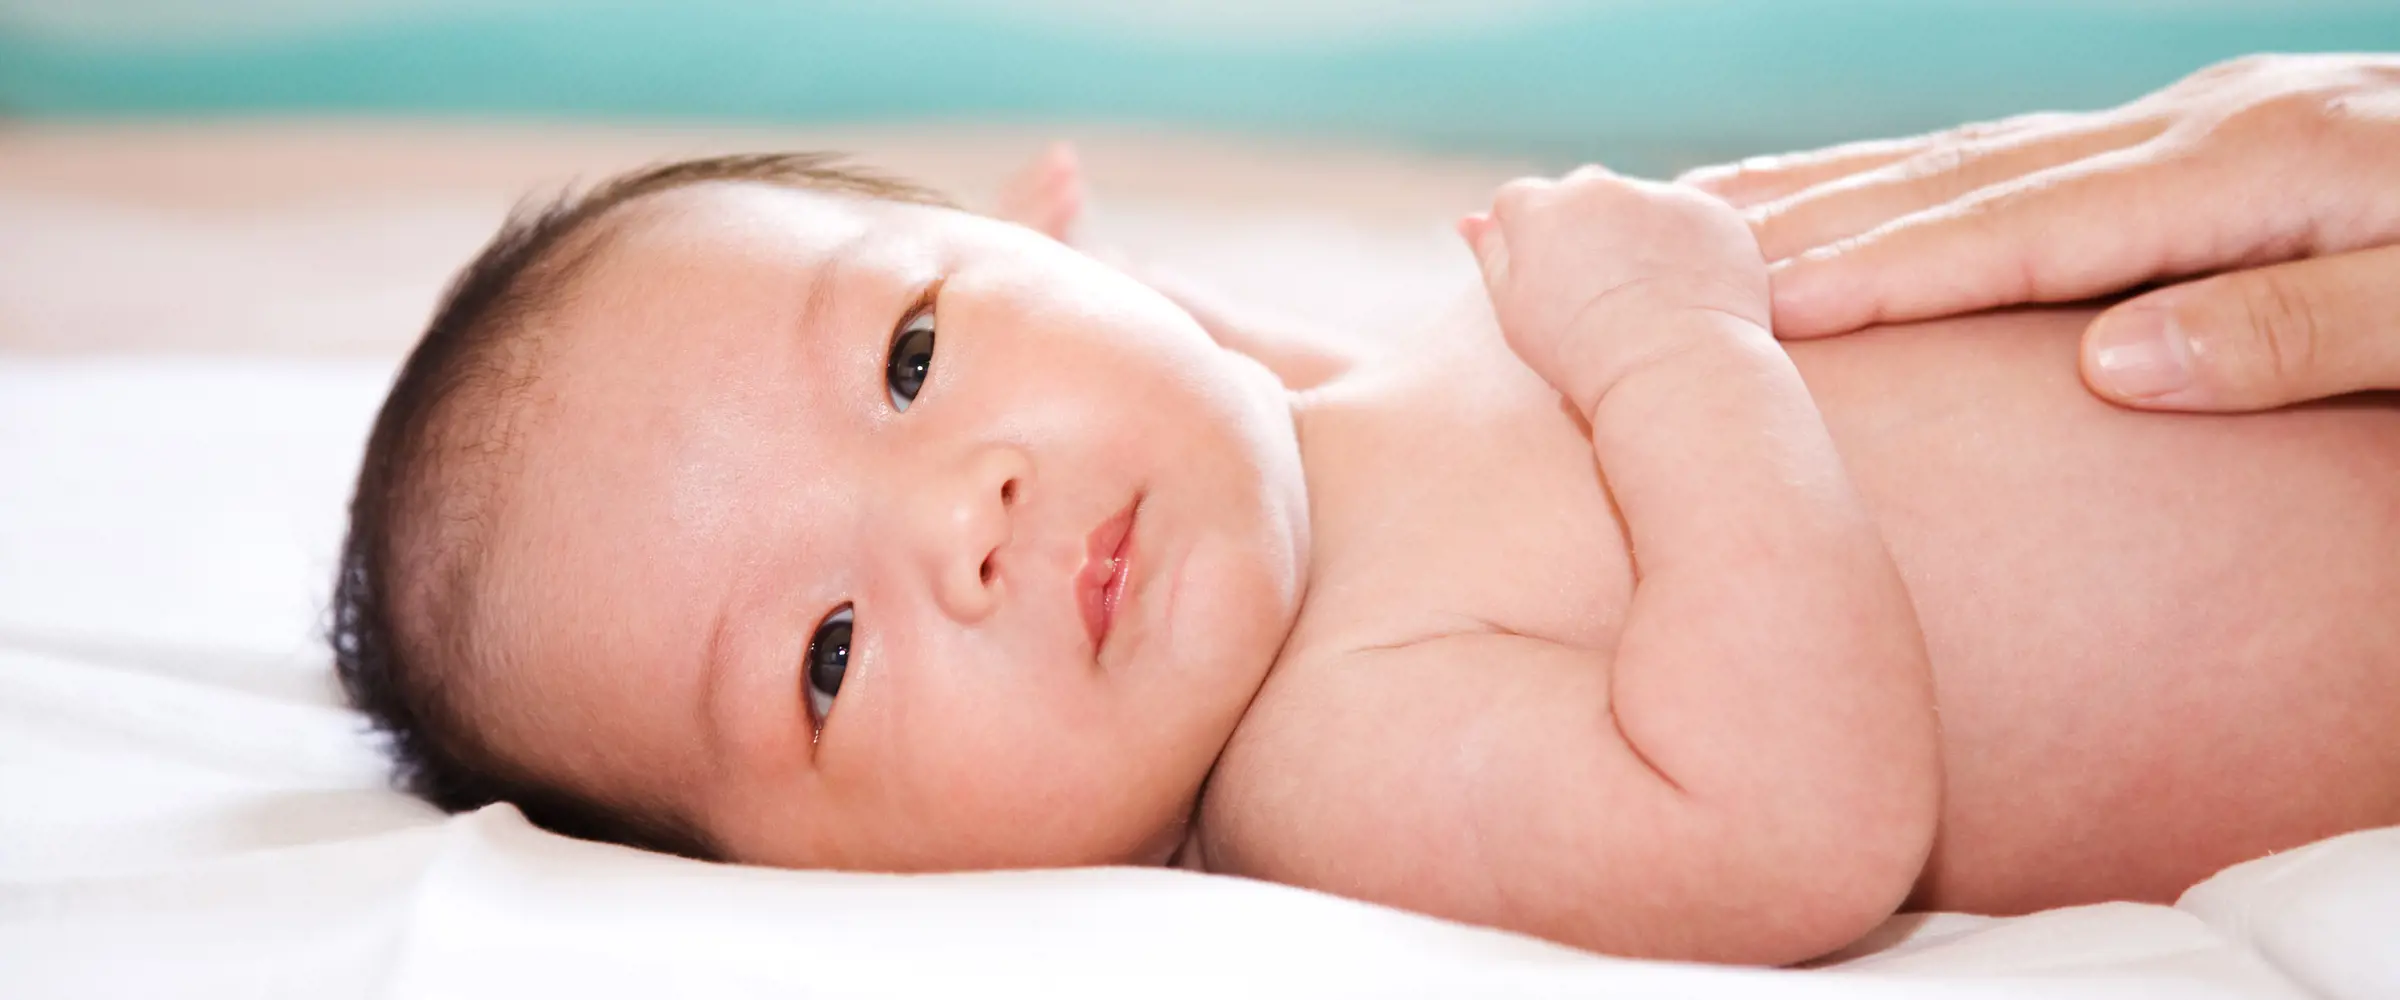 Whey-based ingredient reduces diarrhoea in infants